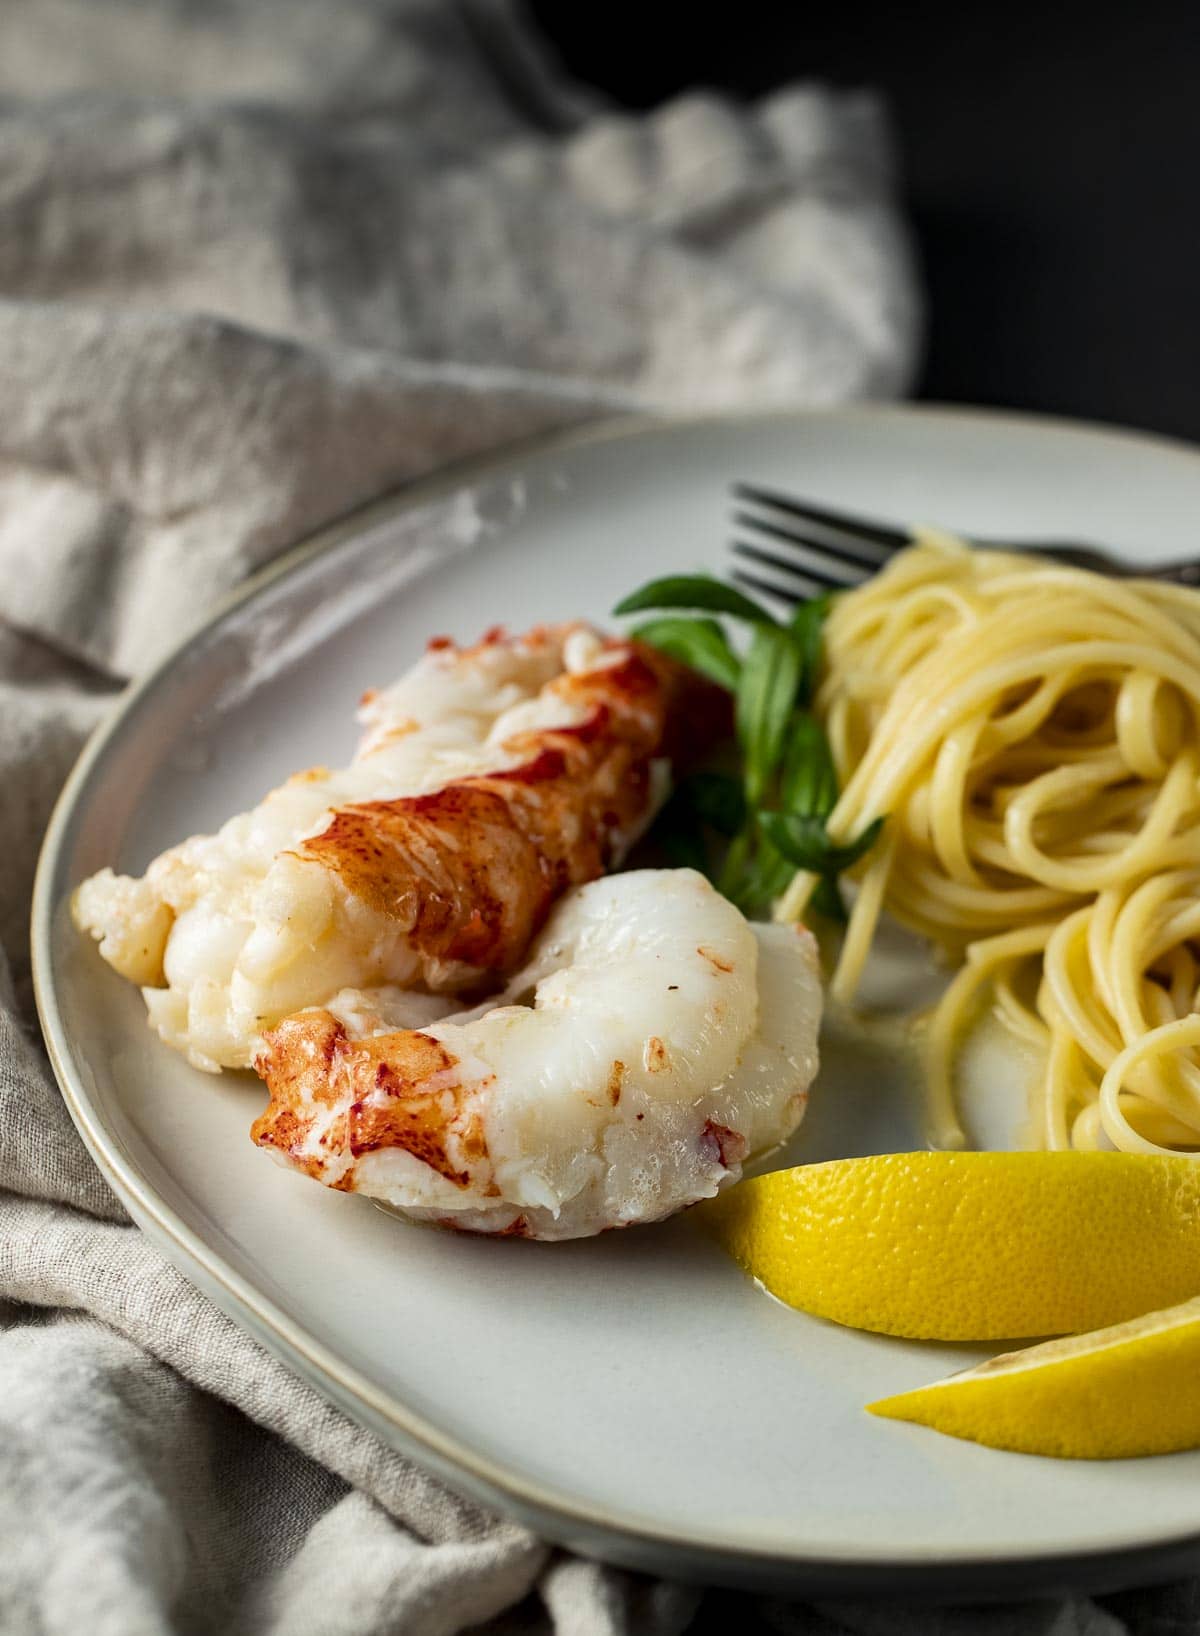 Lobster tails served with pasta and lemon wedges.